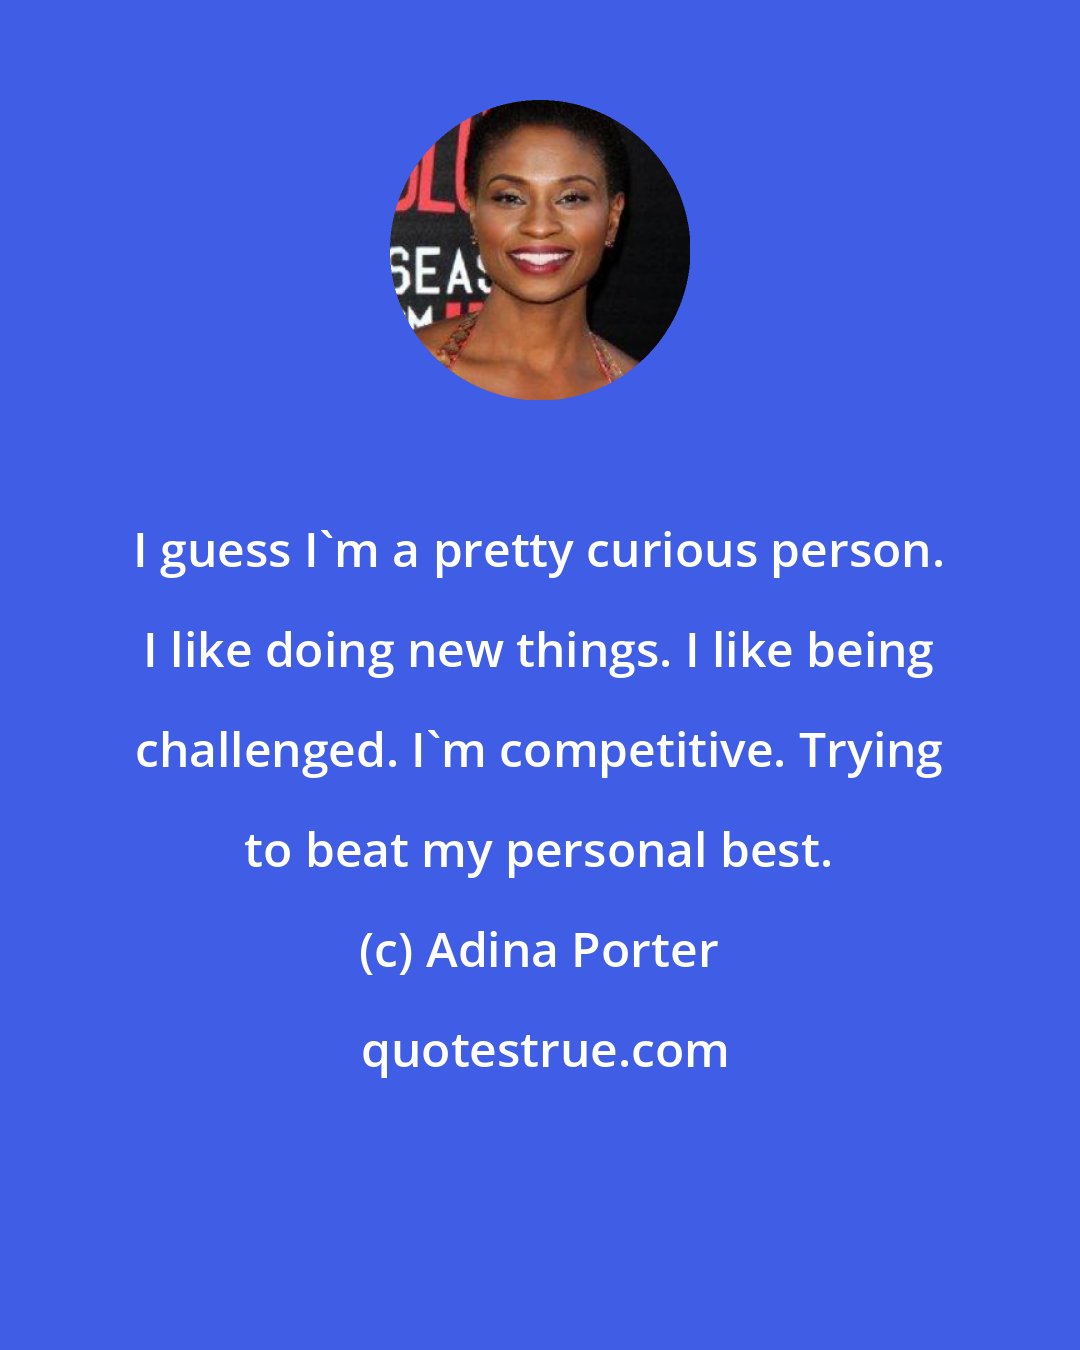 Adina Porter: I guess I'm a pretty curious person. I like doing new things. I like being challenged. I'm competitive. Trying to beat my personal best.